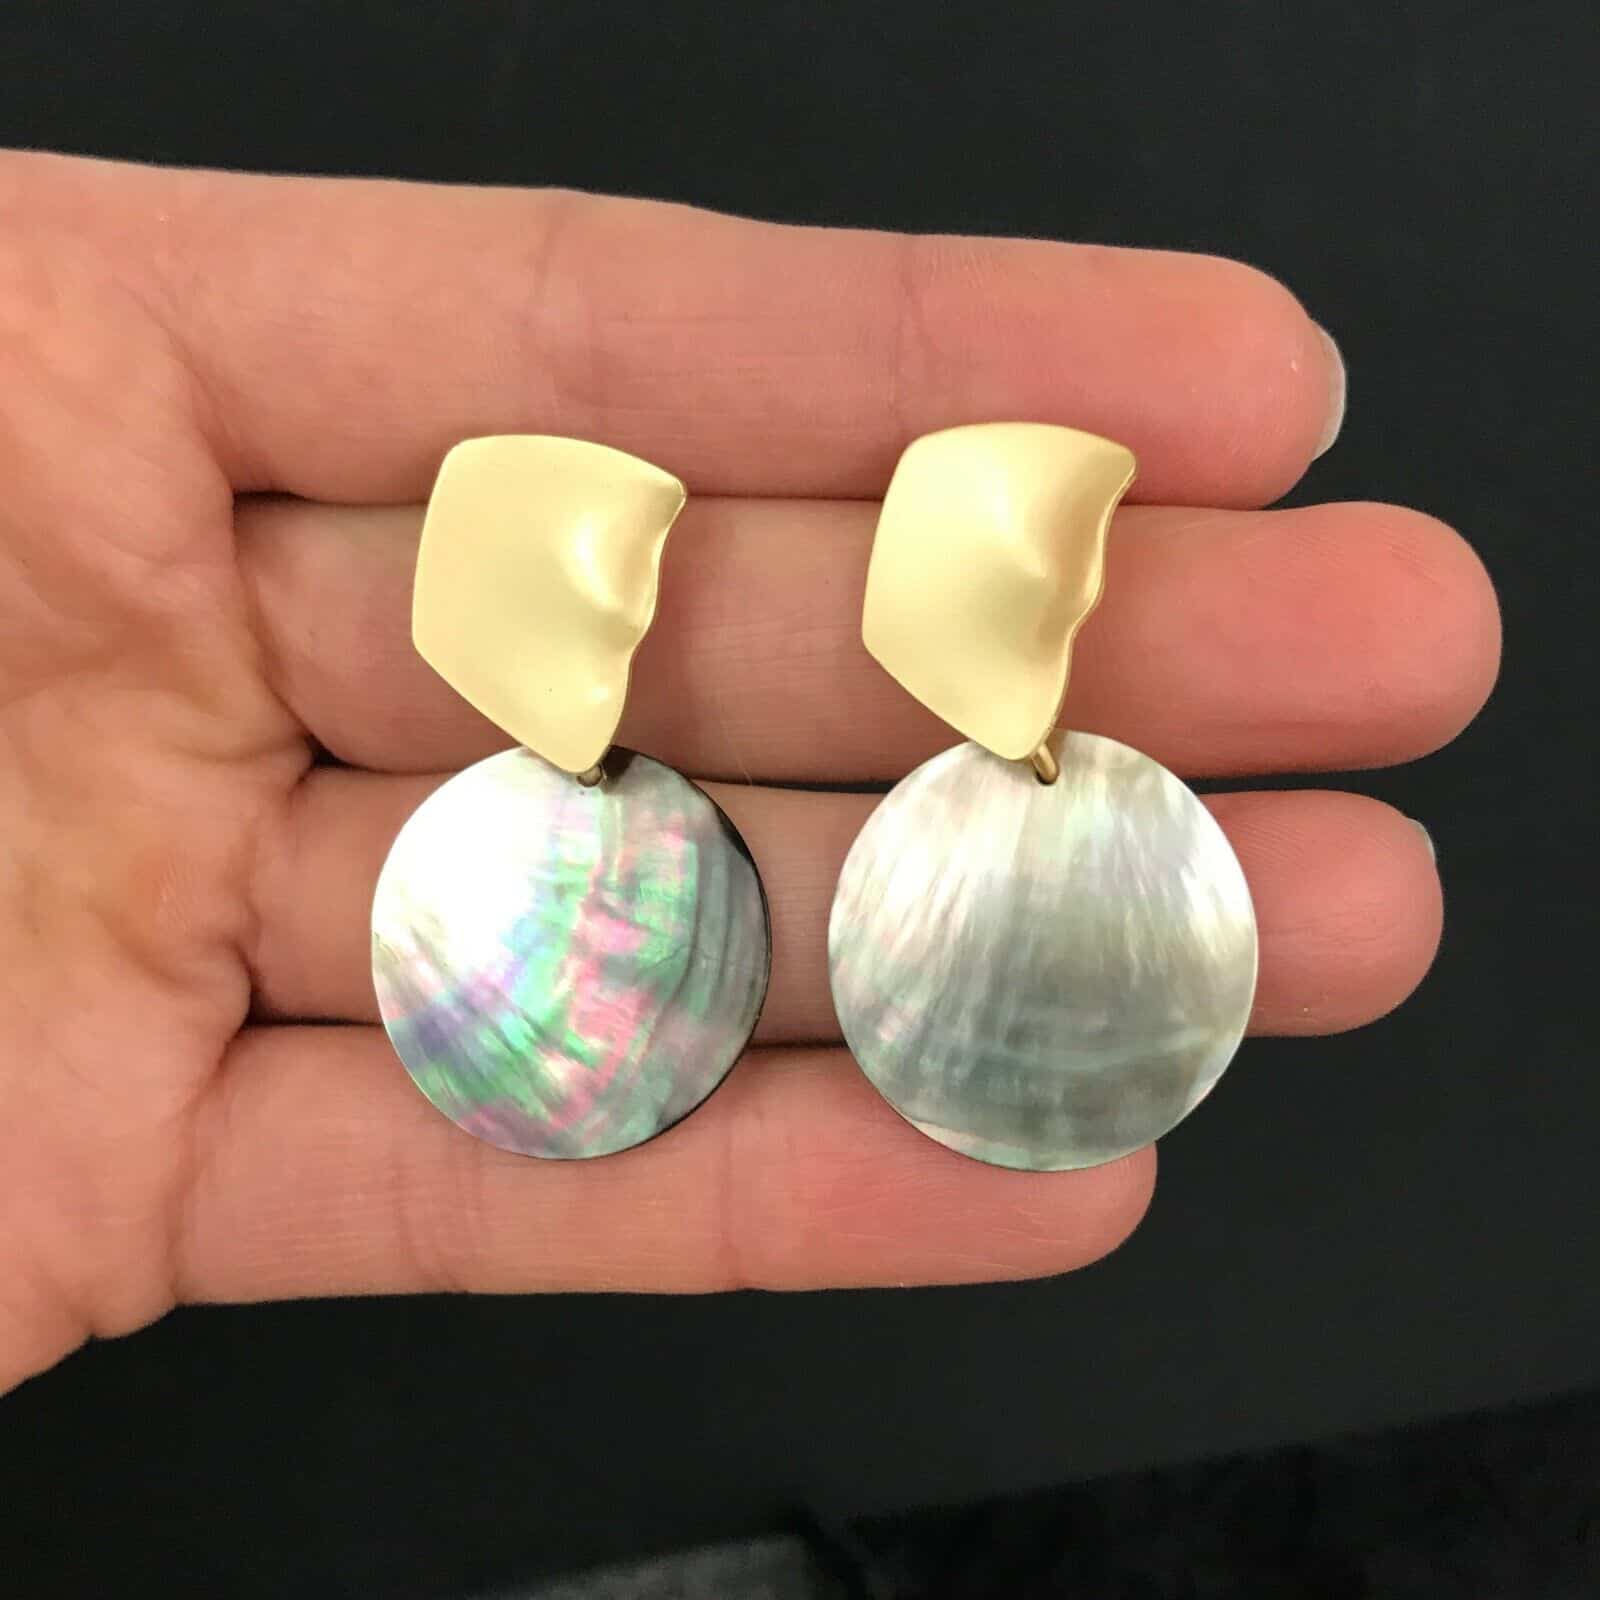 A pair of mother of pearl earrings in a hand.